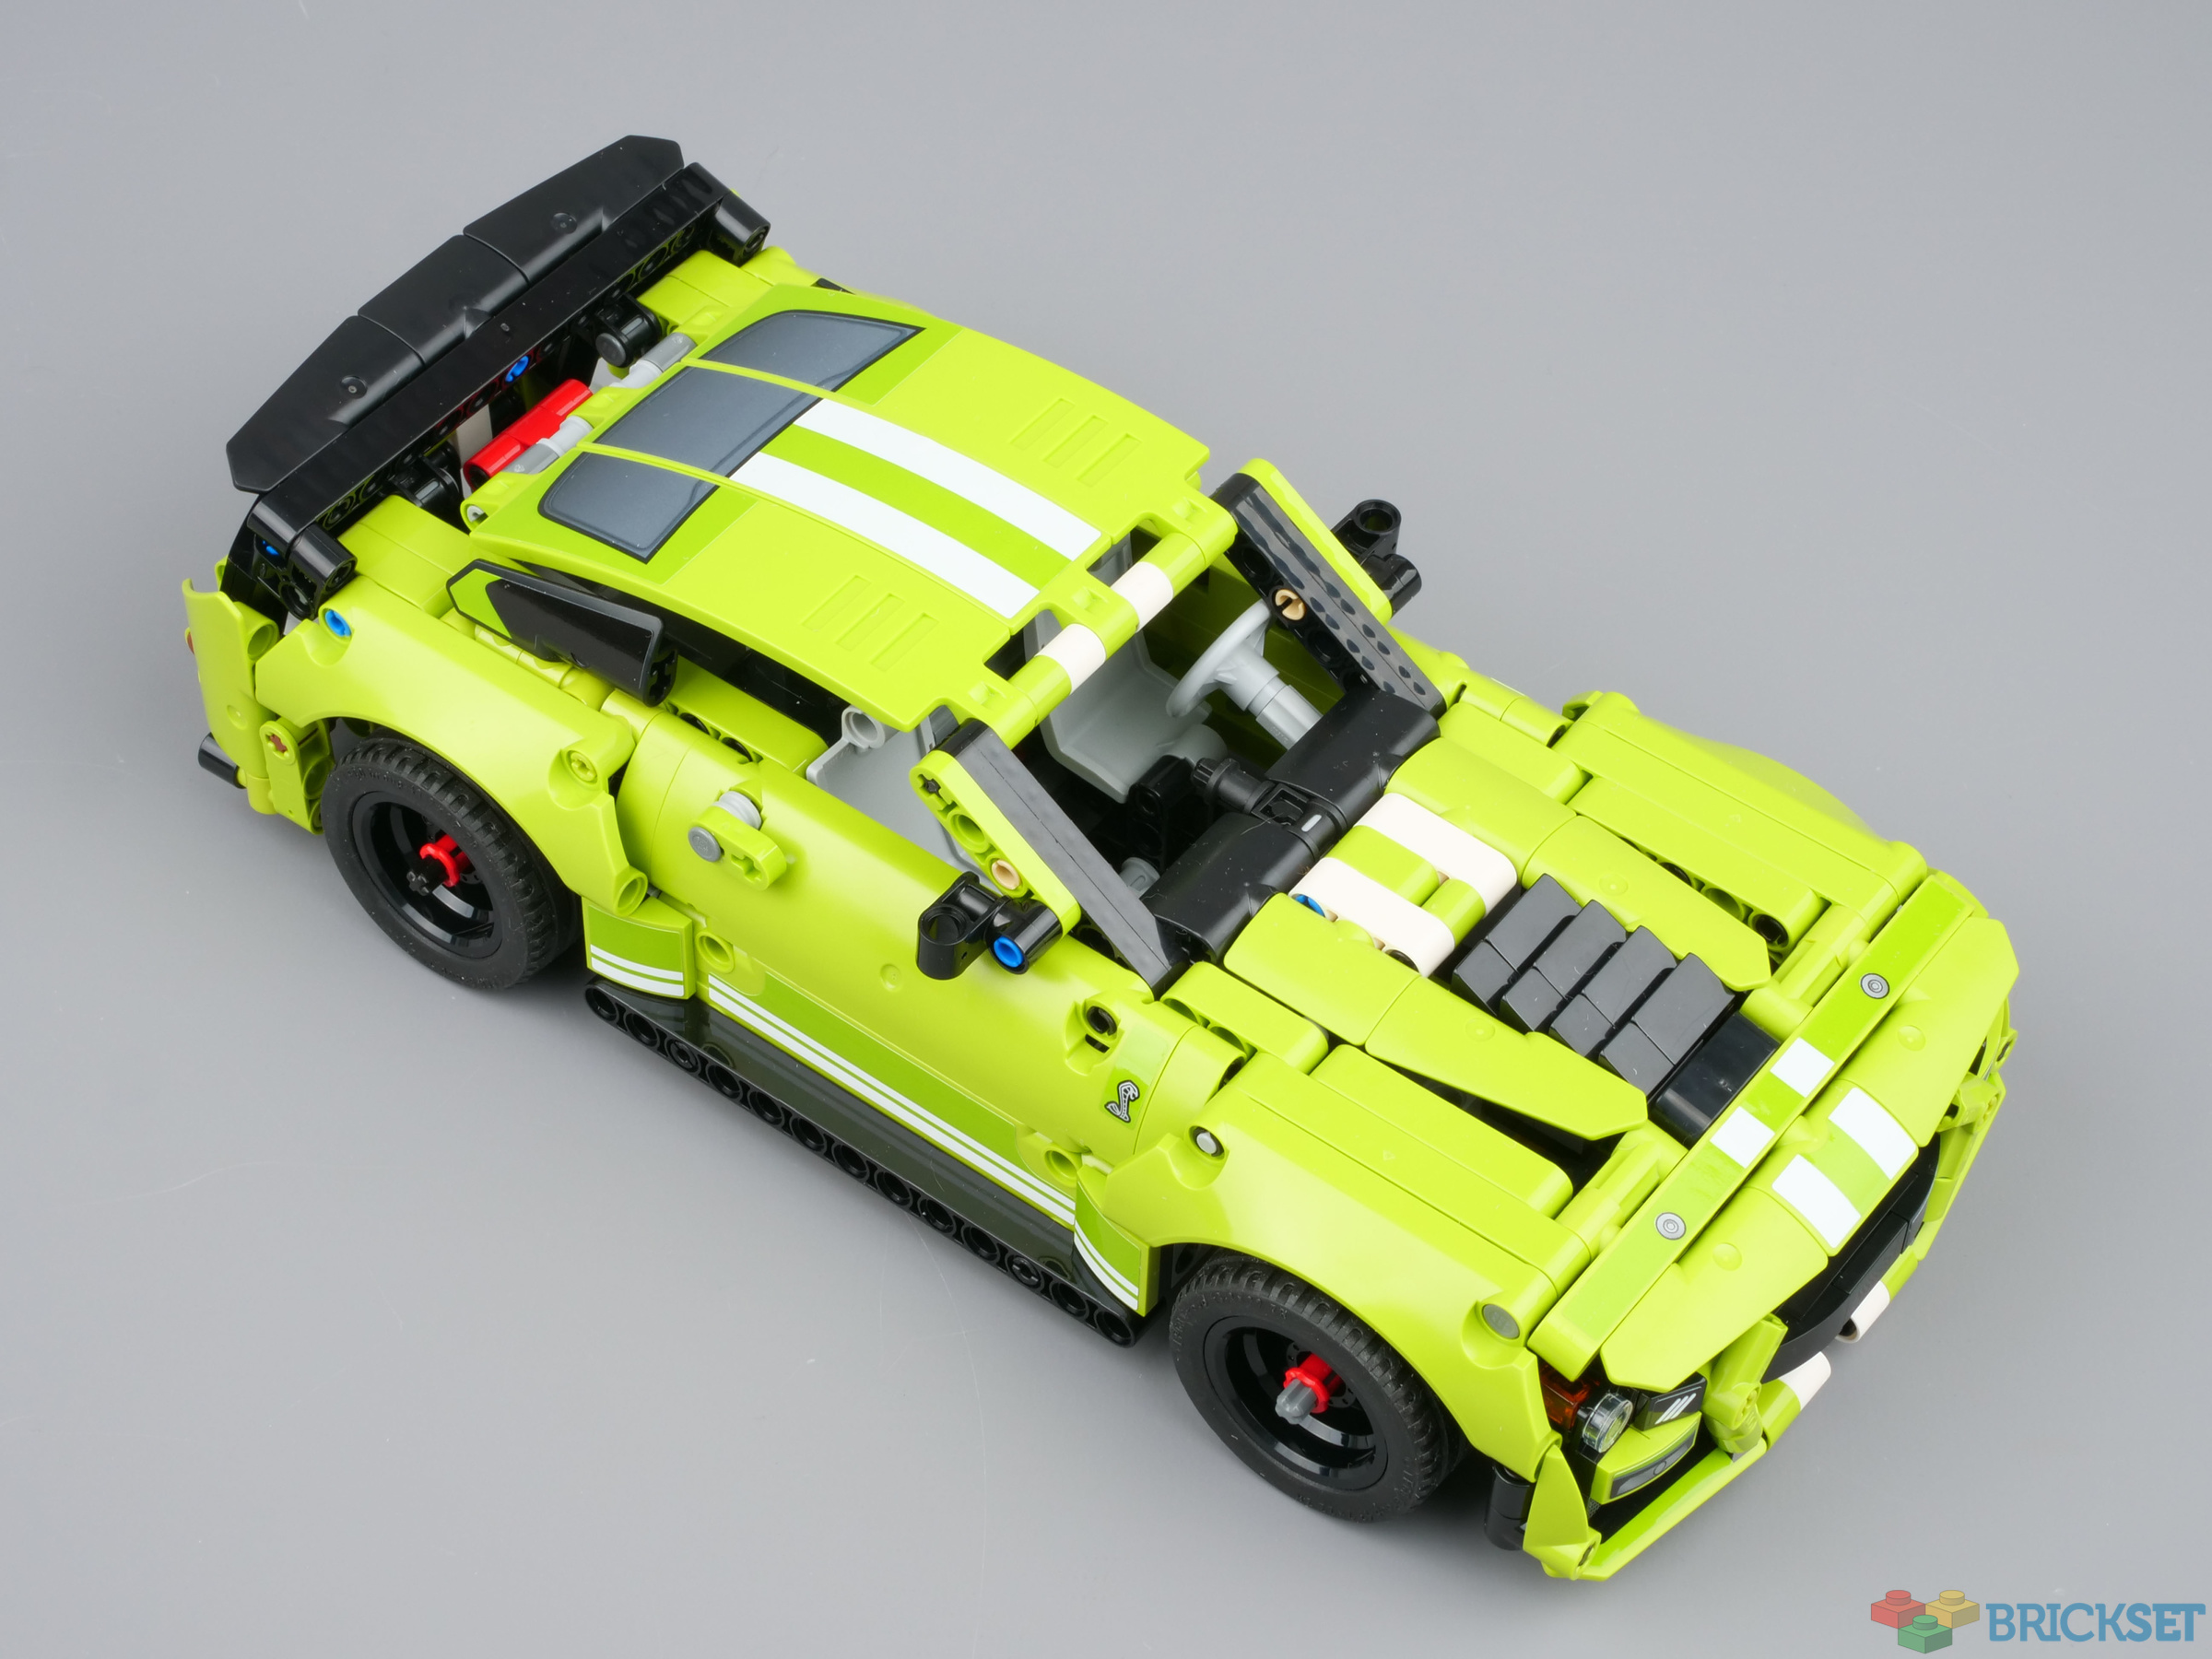 LEGO 42138 Ford Mustang Shelby GT500